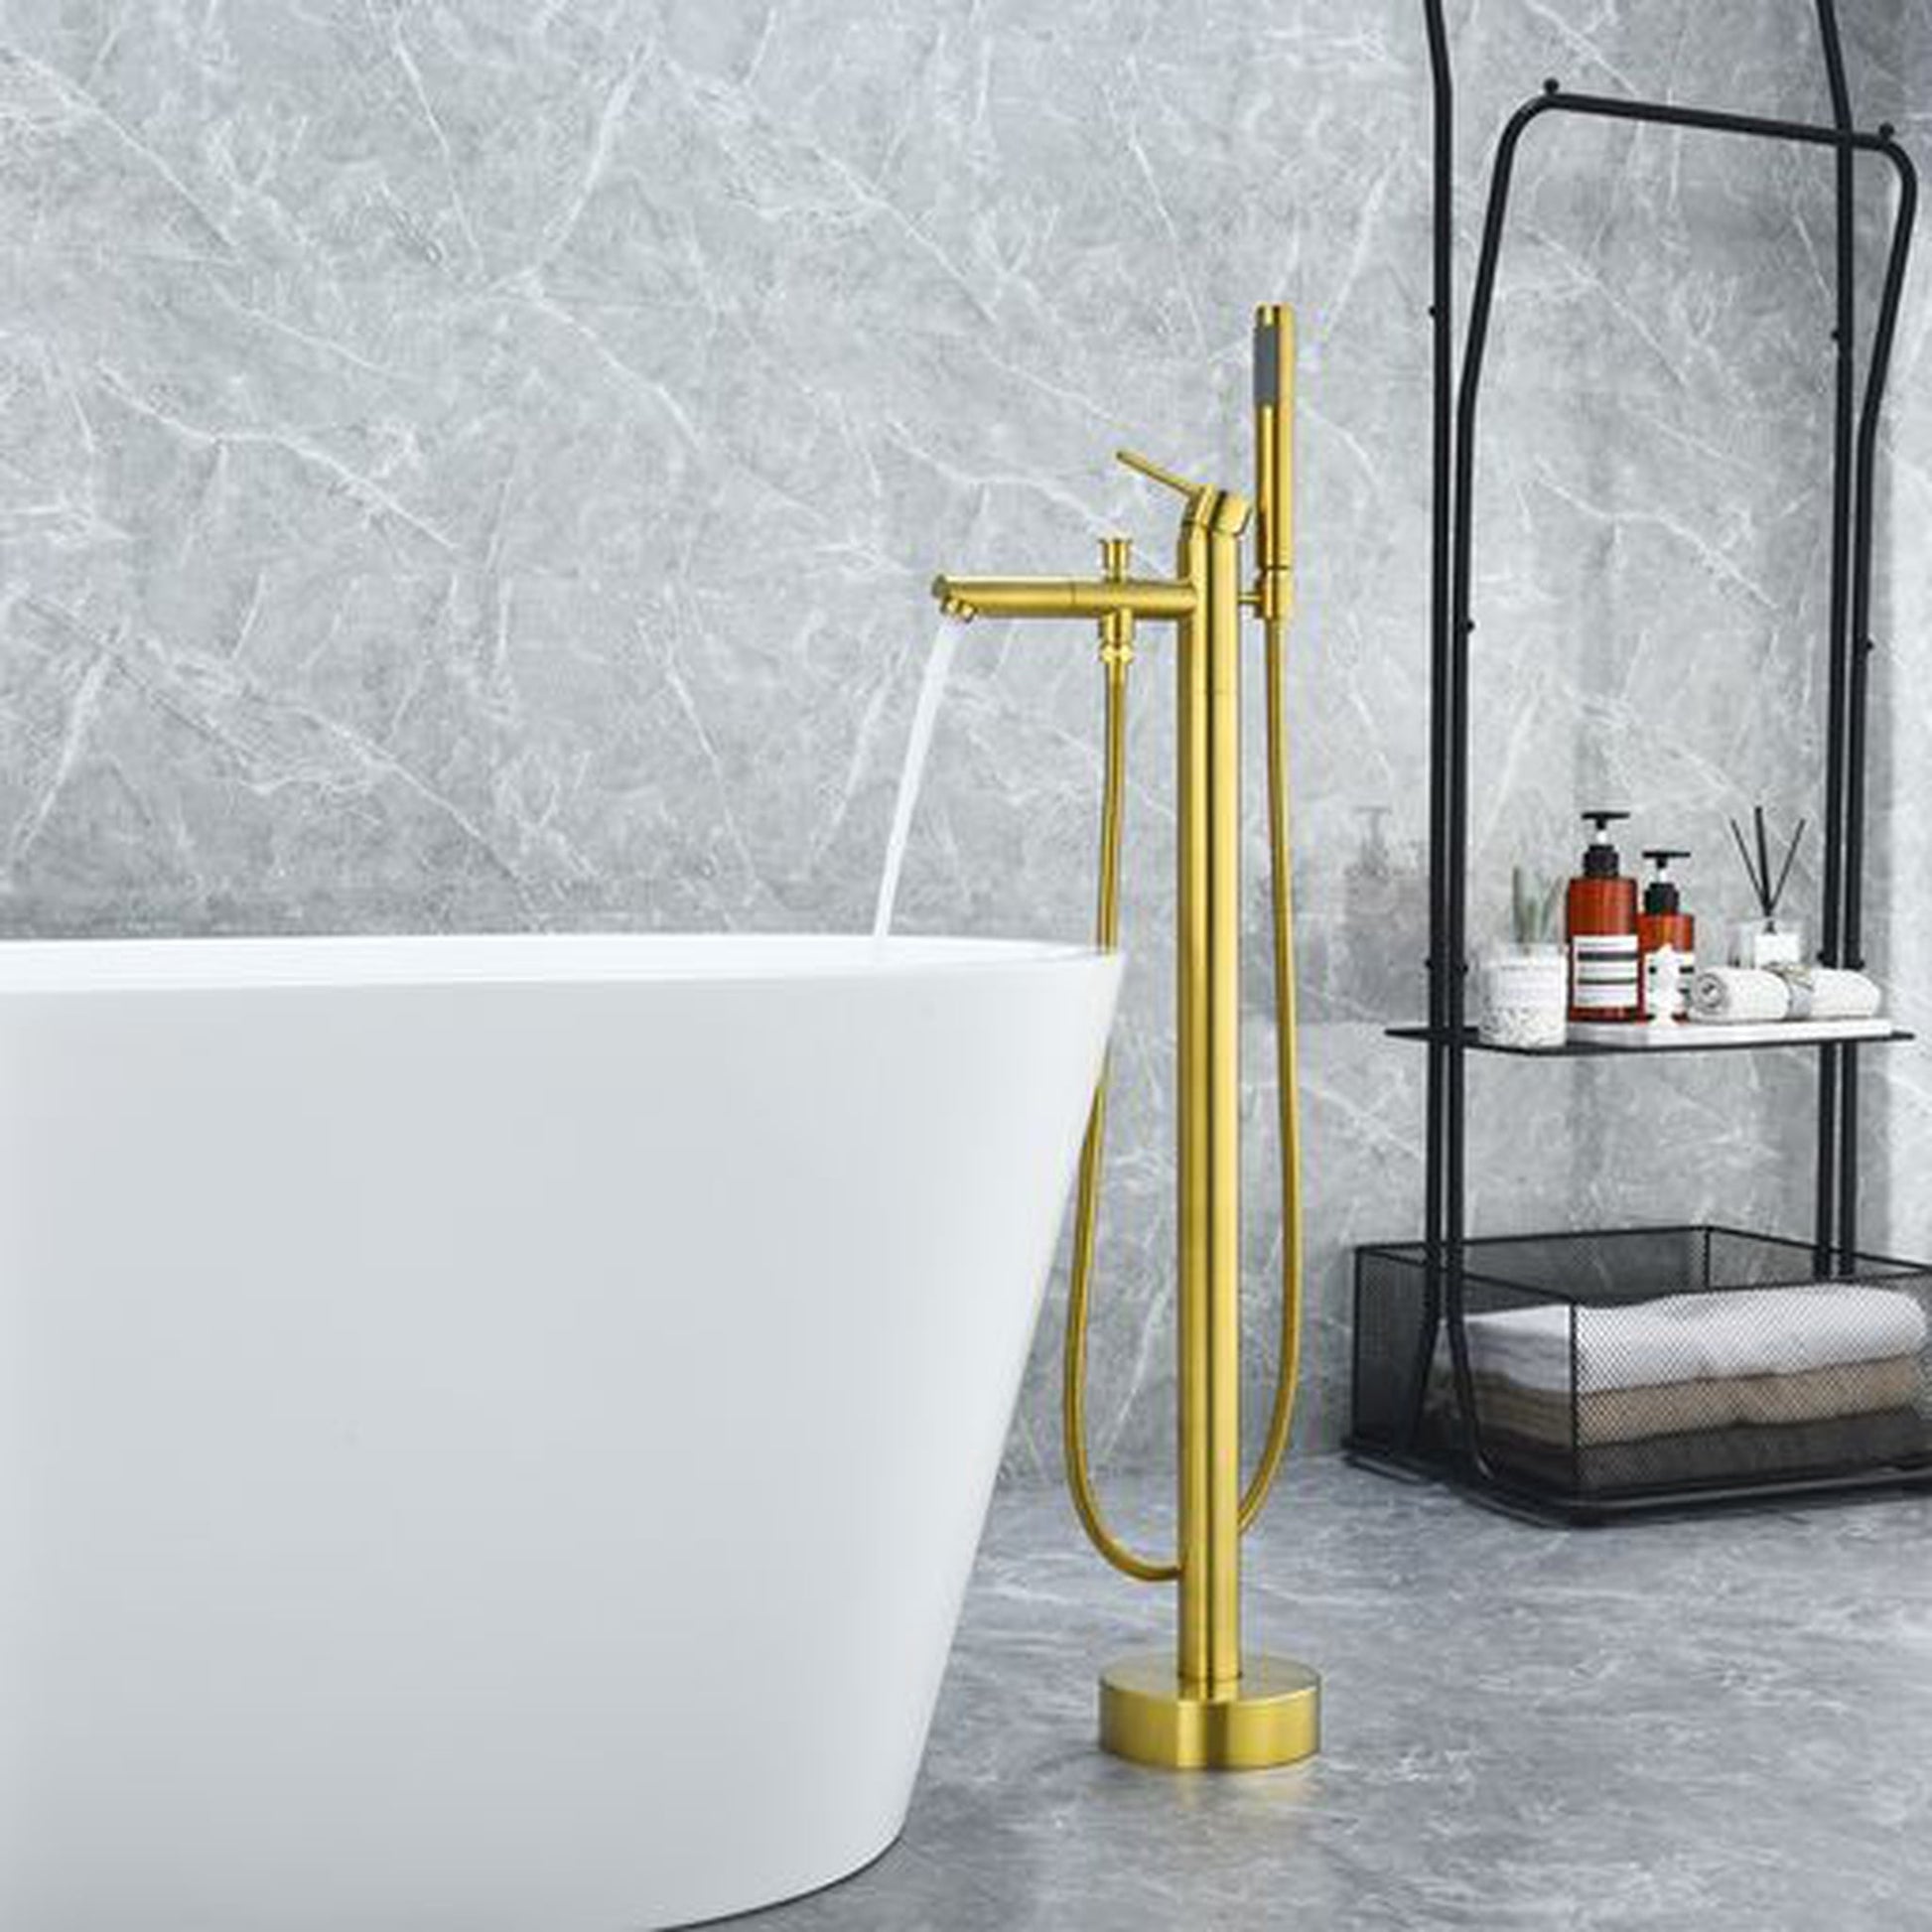 Altair Larod Brushed Gold Single Lever Handle Freestanding Bathtub Faucet With Handshower